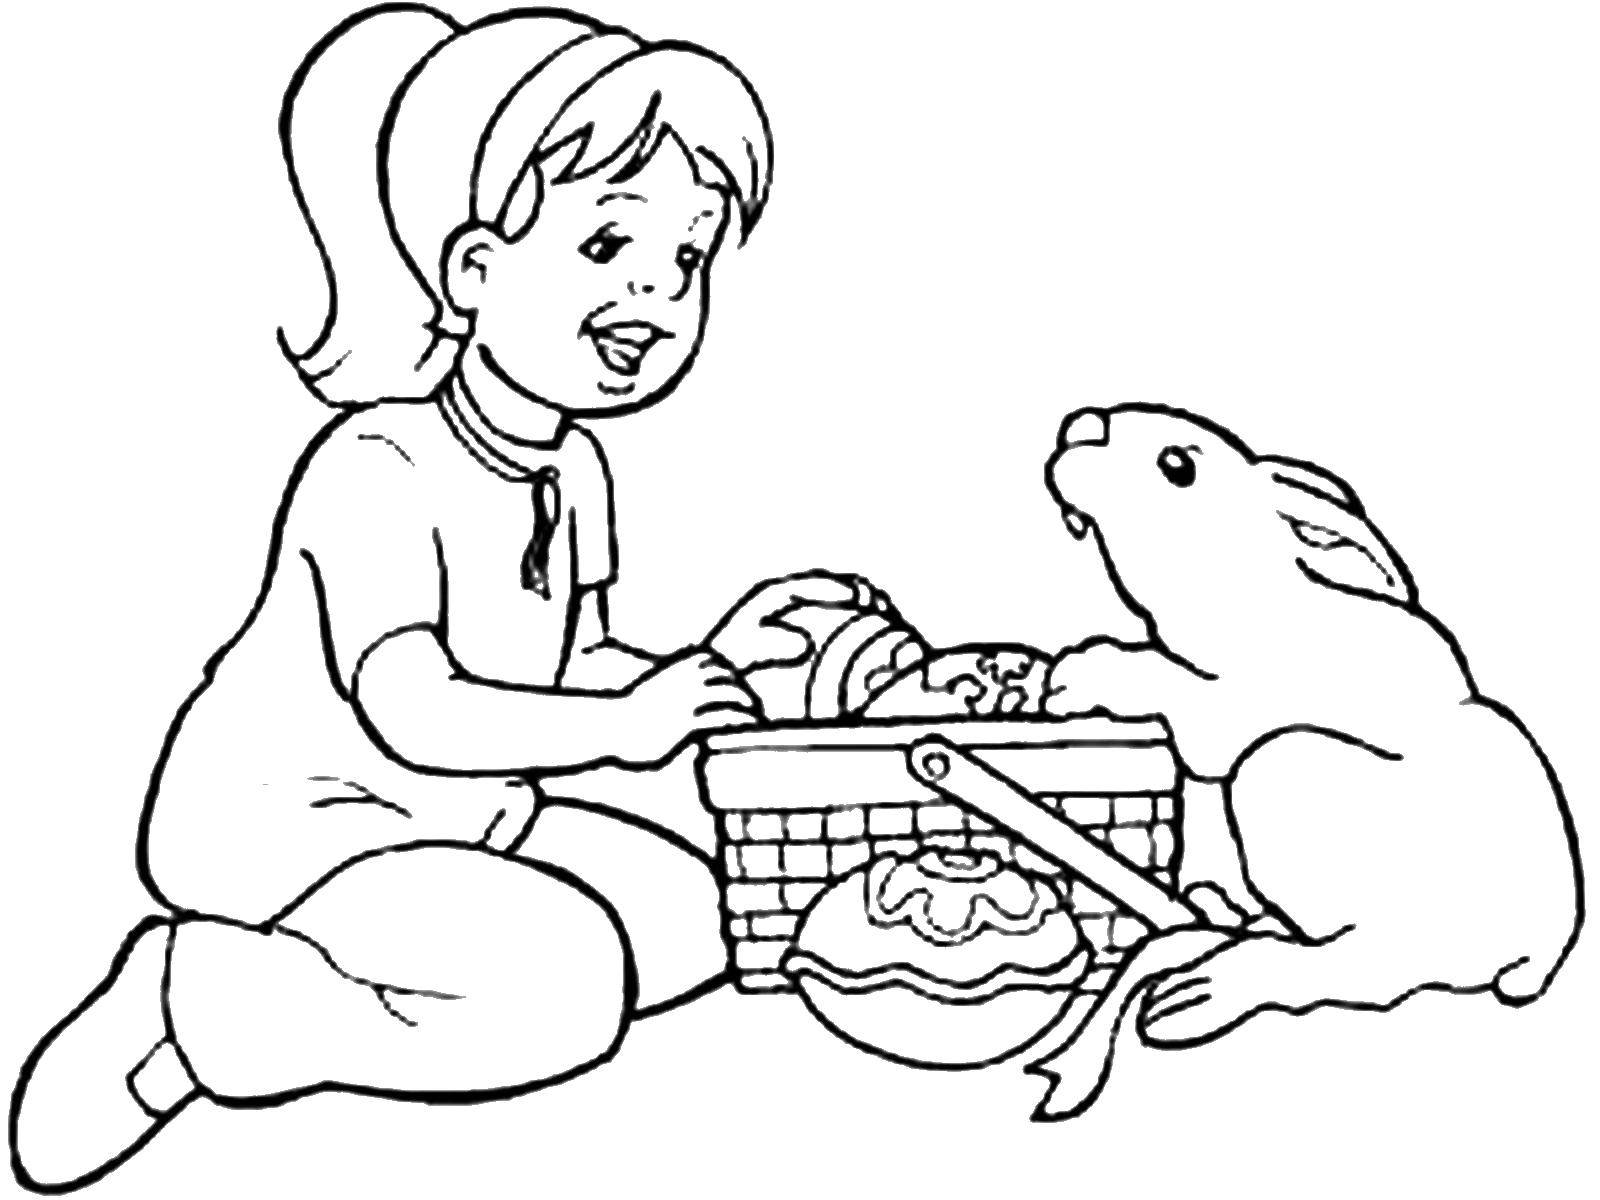 Coloring Rabbit and girl. Category children. Tags:  children, girl, rabbit.